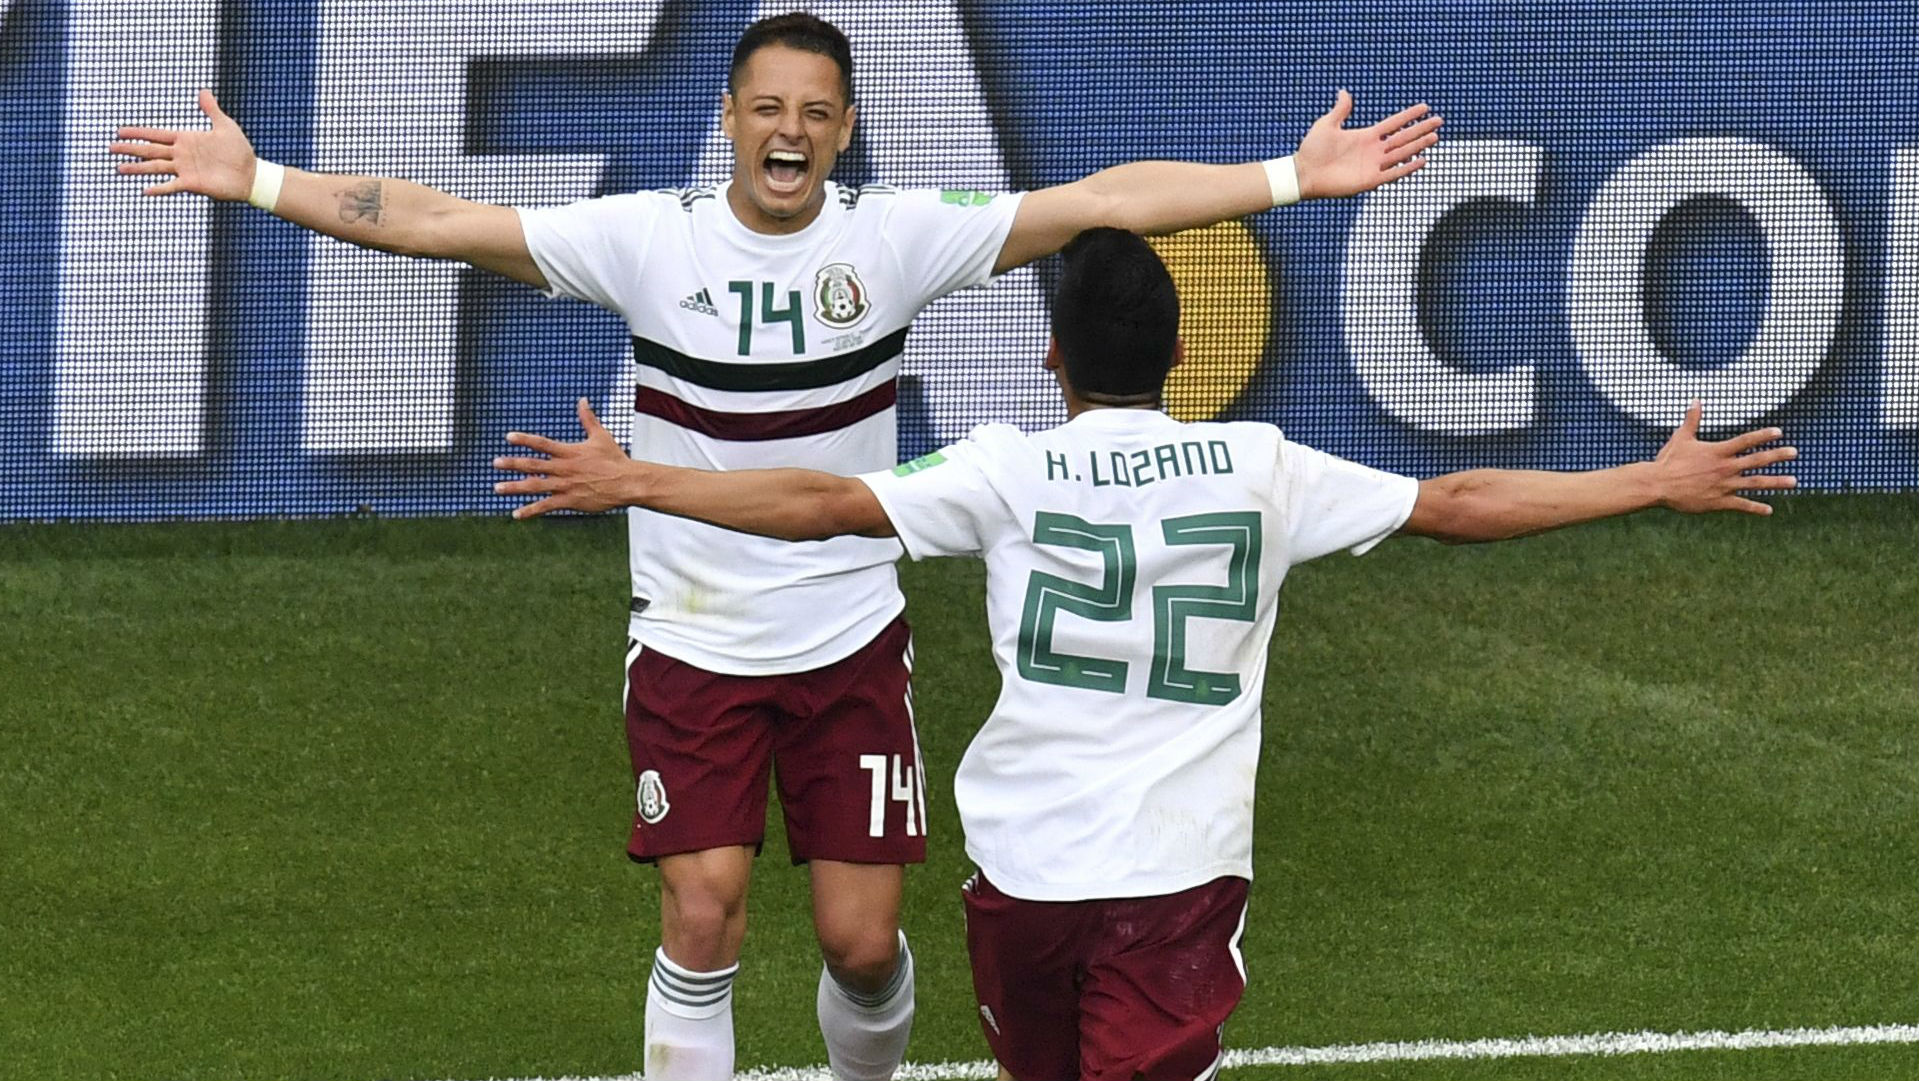 Chicharito focused on team success, not personal accolades - LAG